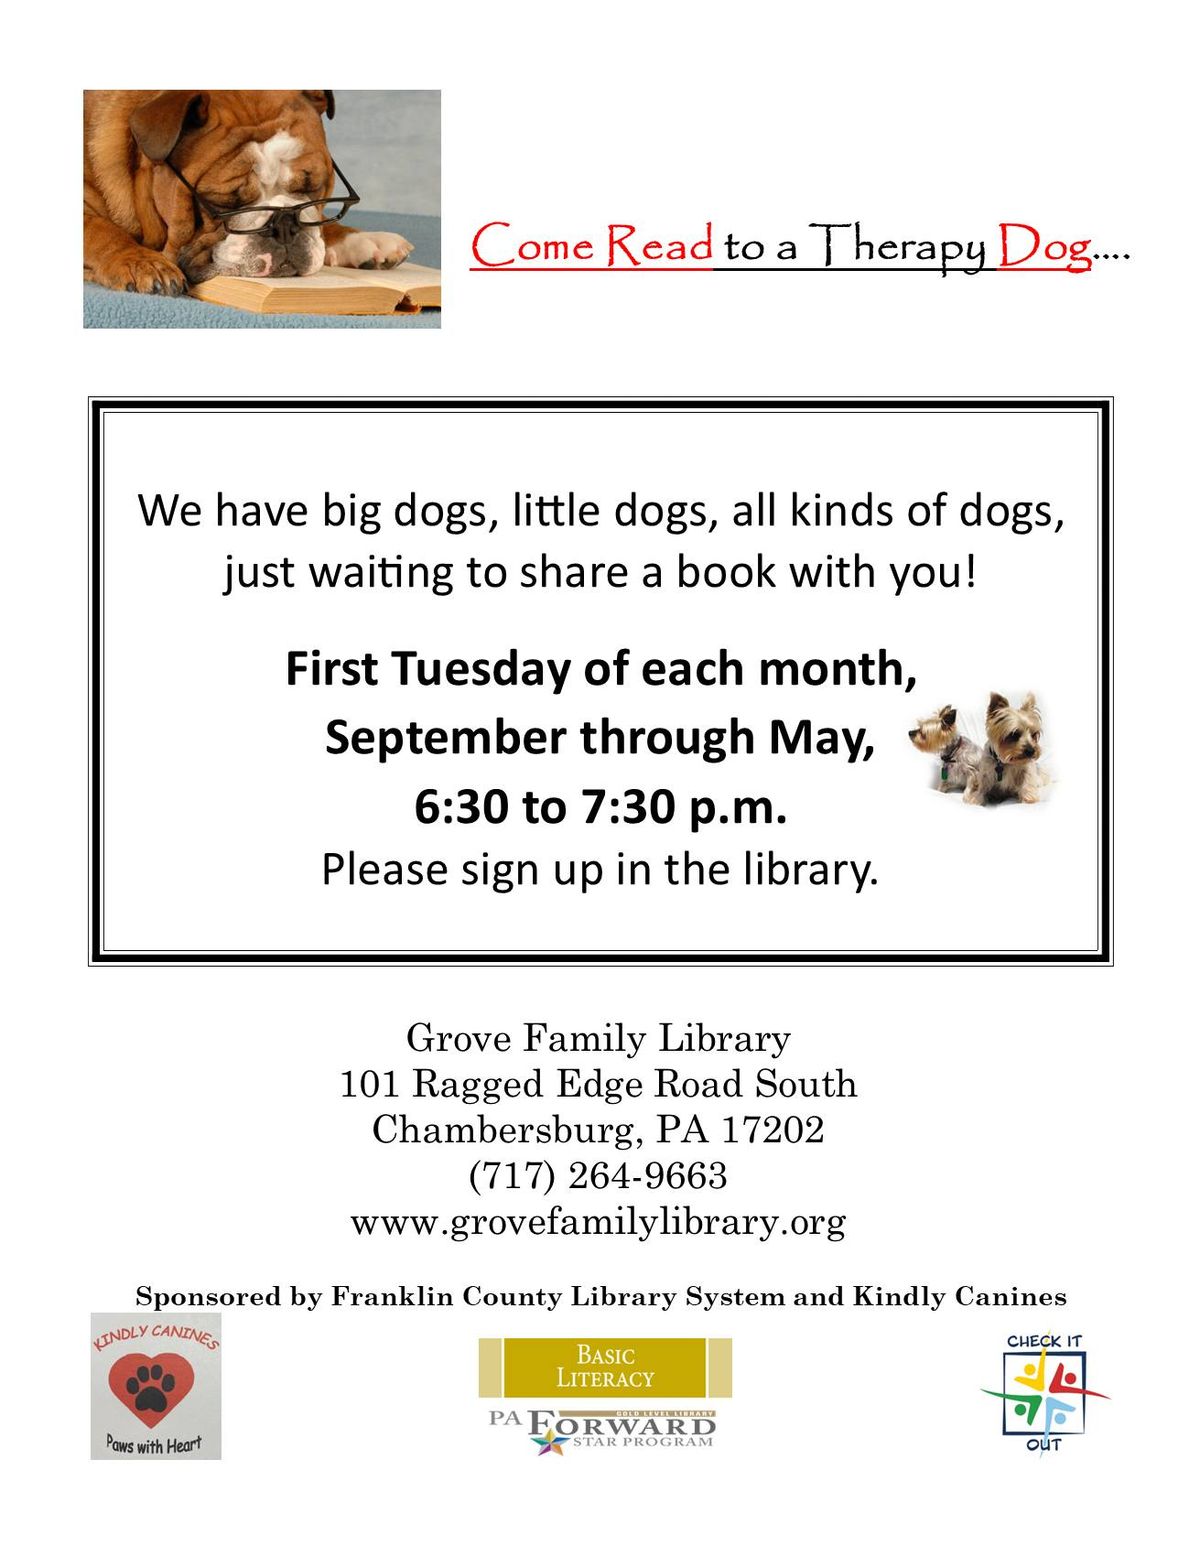 Come Read to a Therapy Dog - First Tuesday of each month